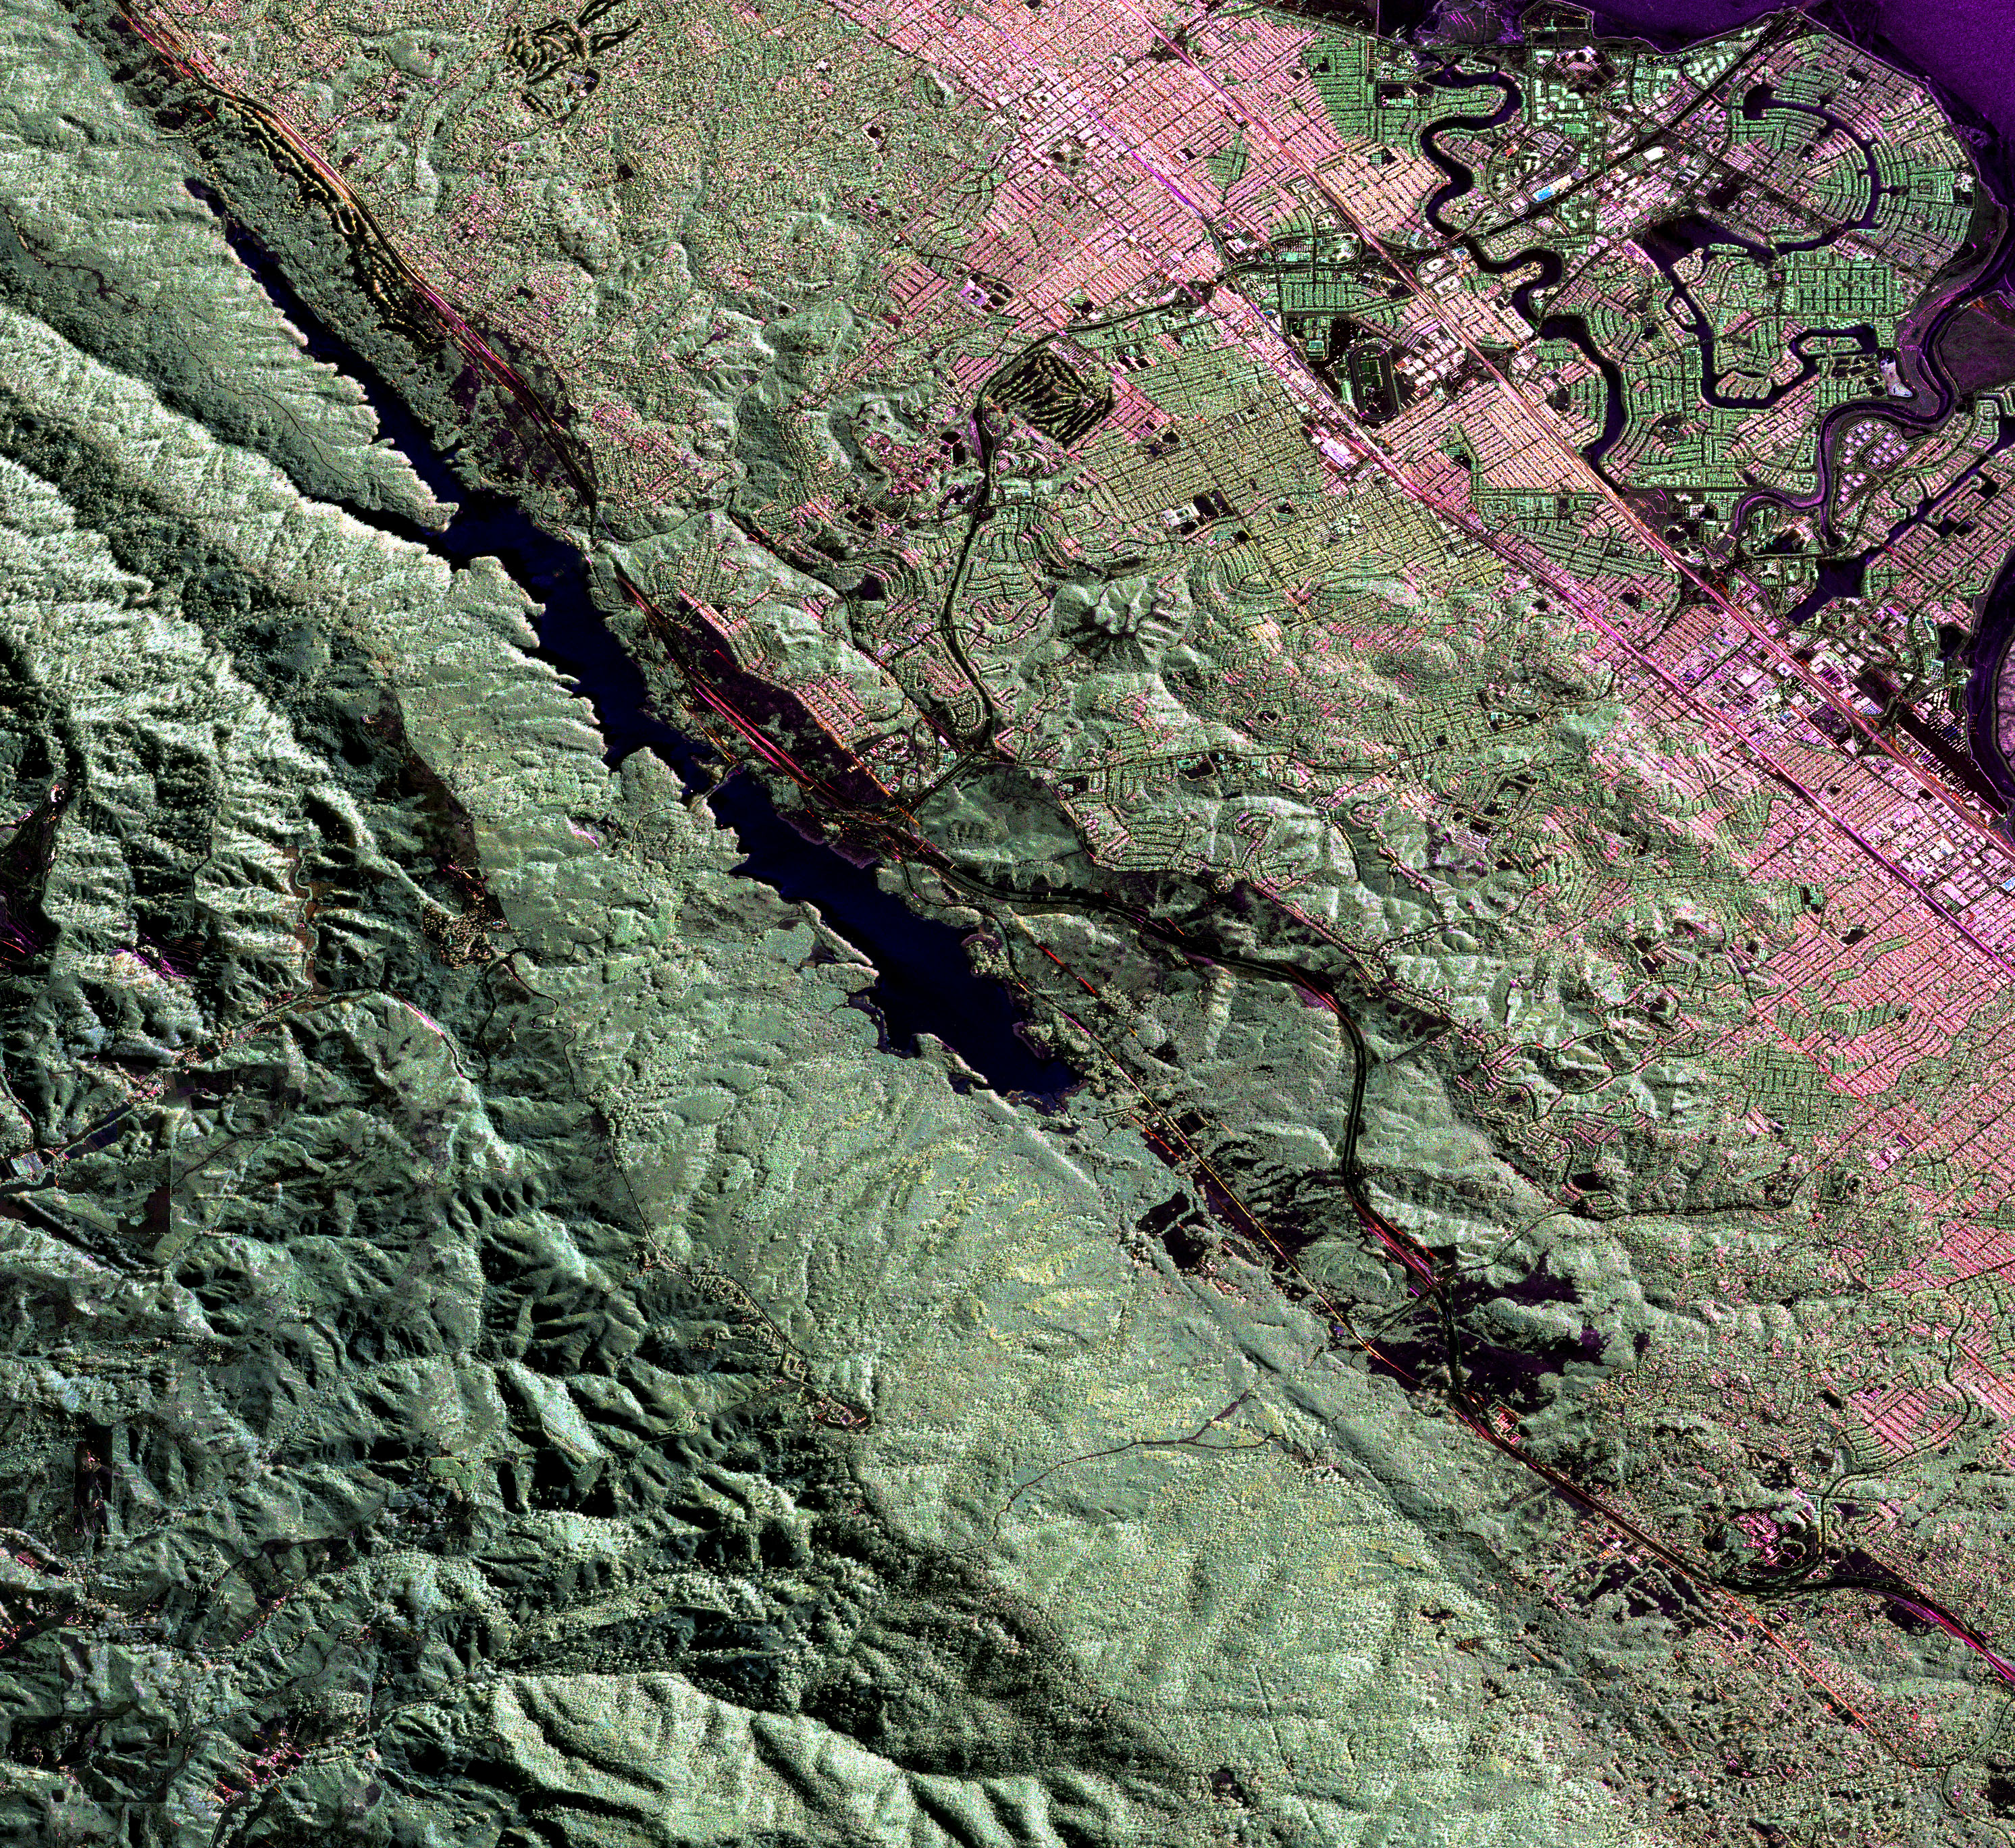 NASA Radar Provides 3-D View of San Andreas Fault - related image preview